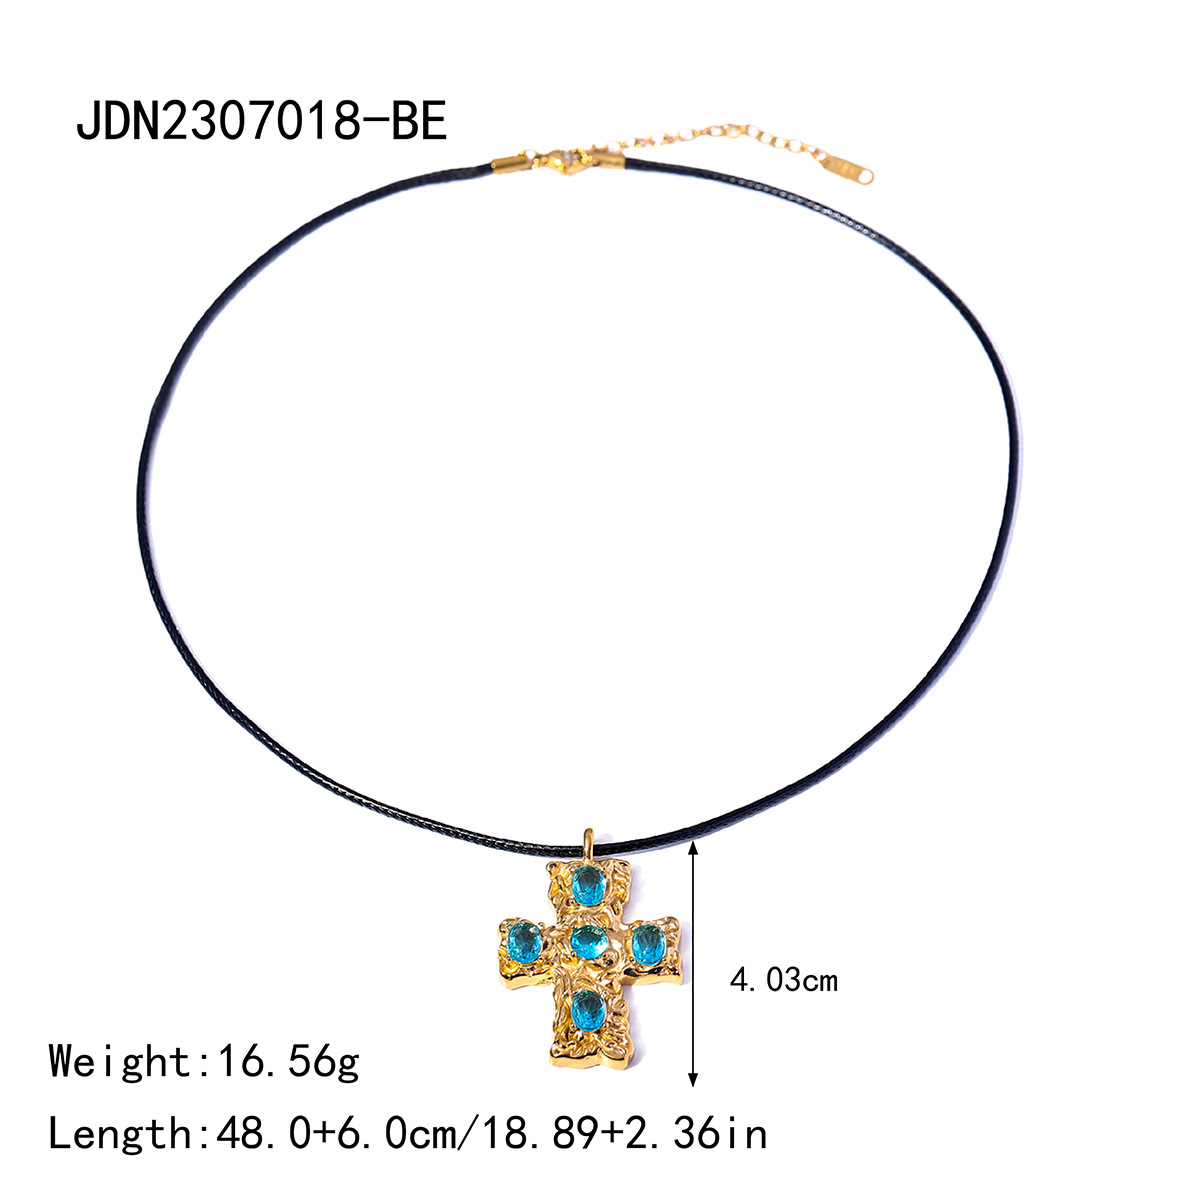 2:JDN2307018-BE